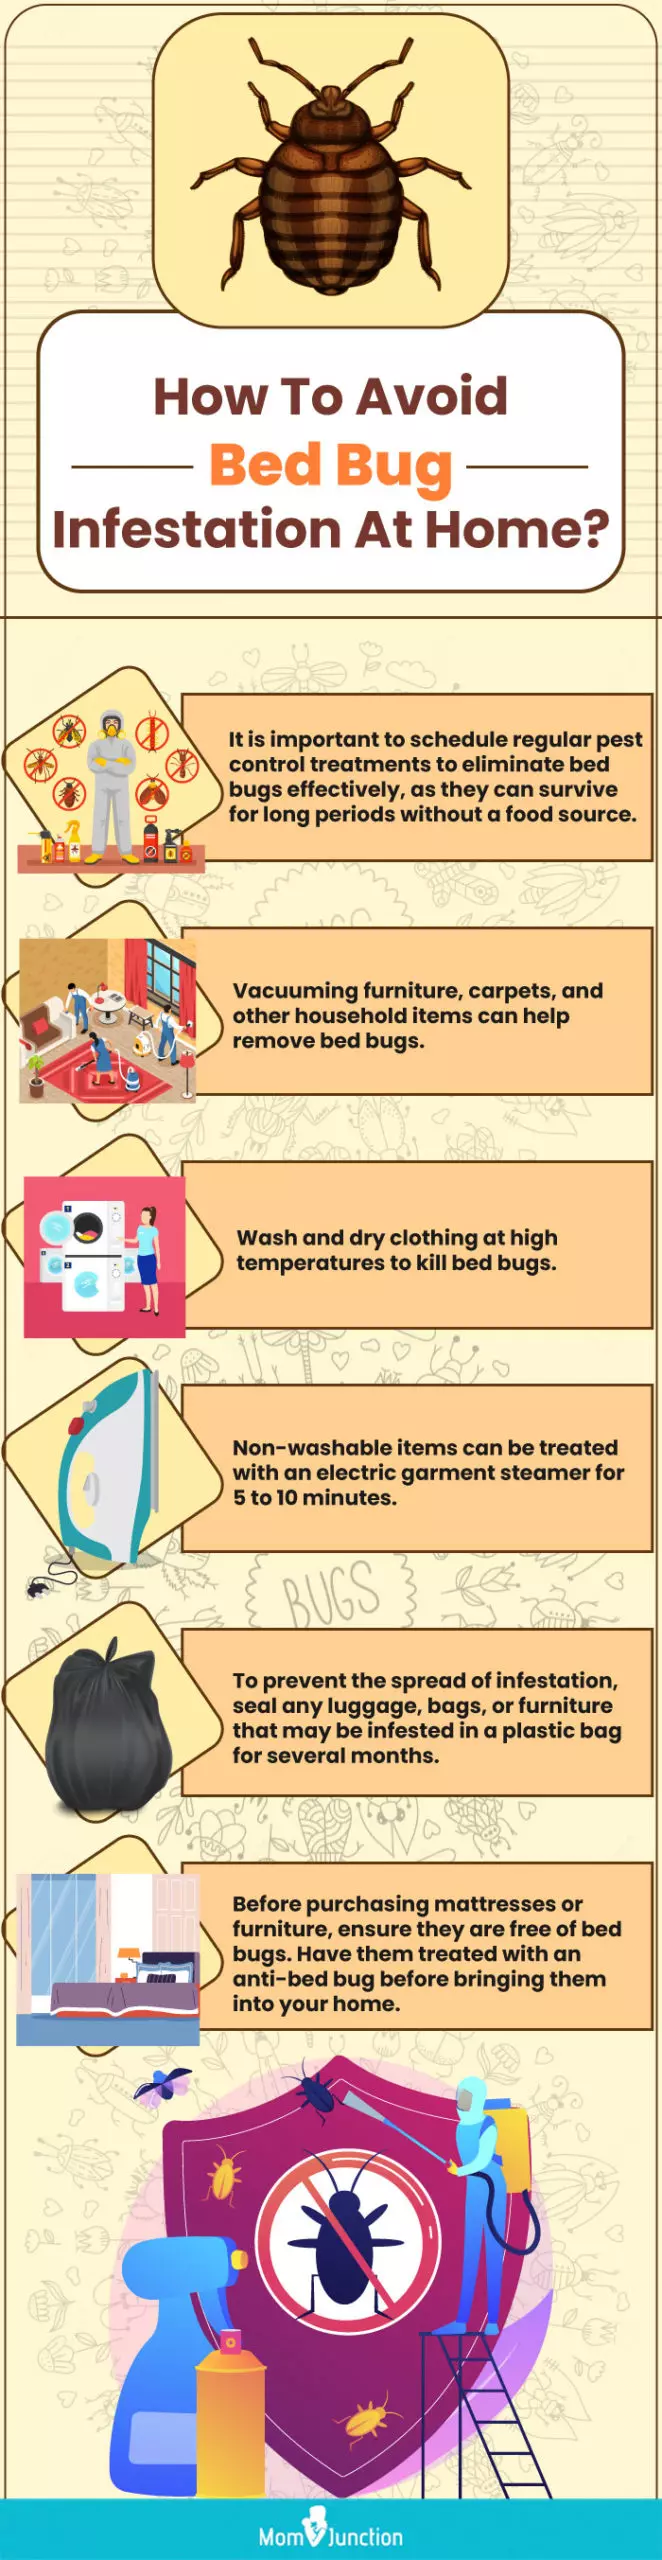 how to avoid bed bug infestation at home (infographic)